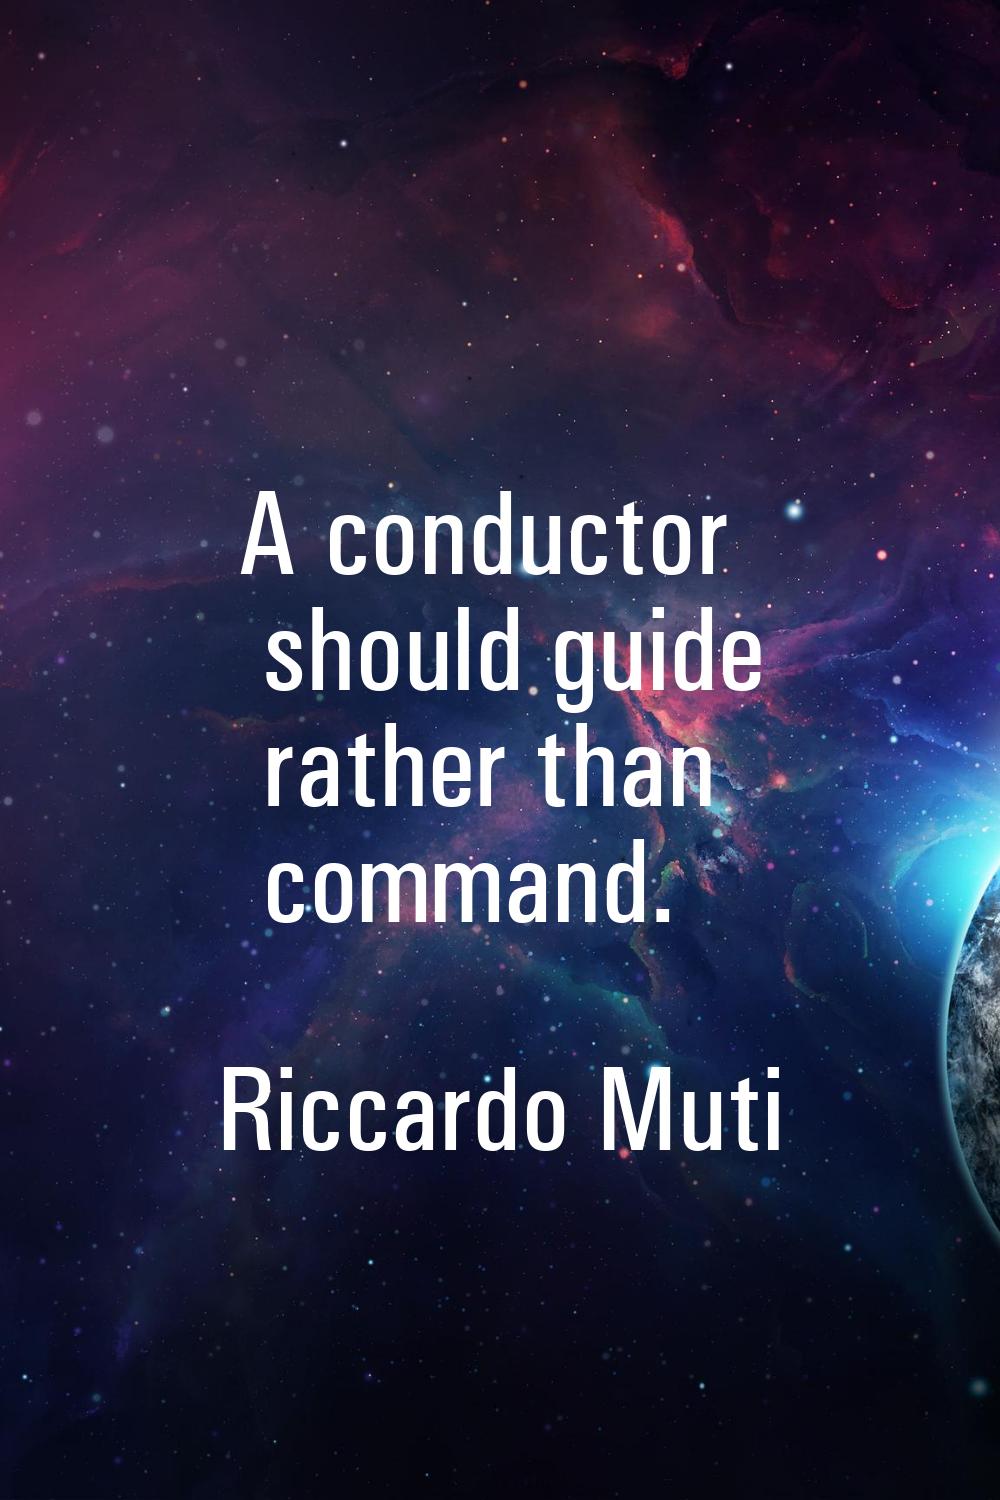 A conductor should guide rather than command.